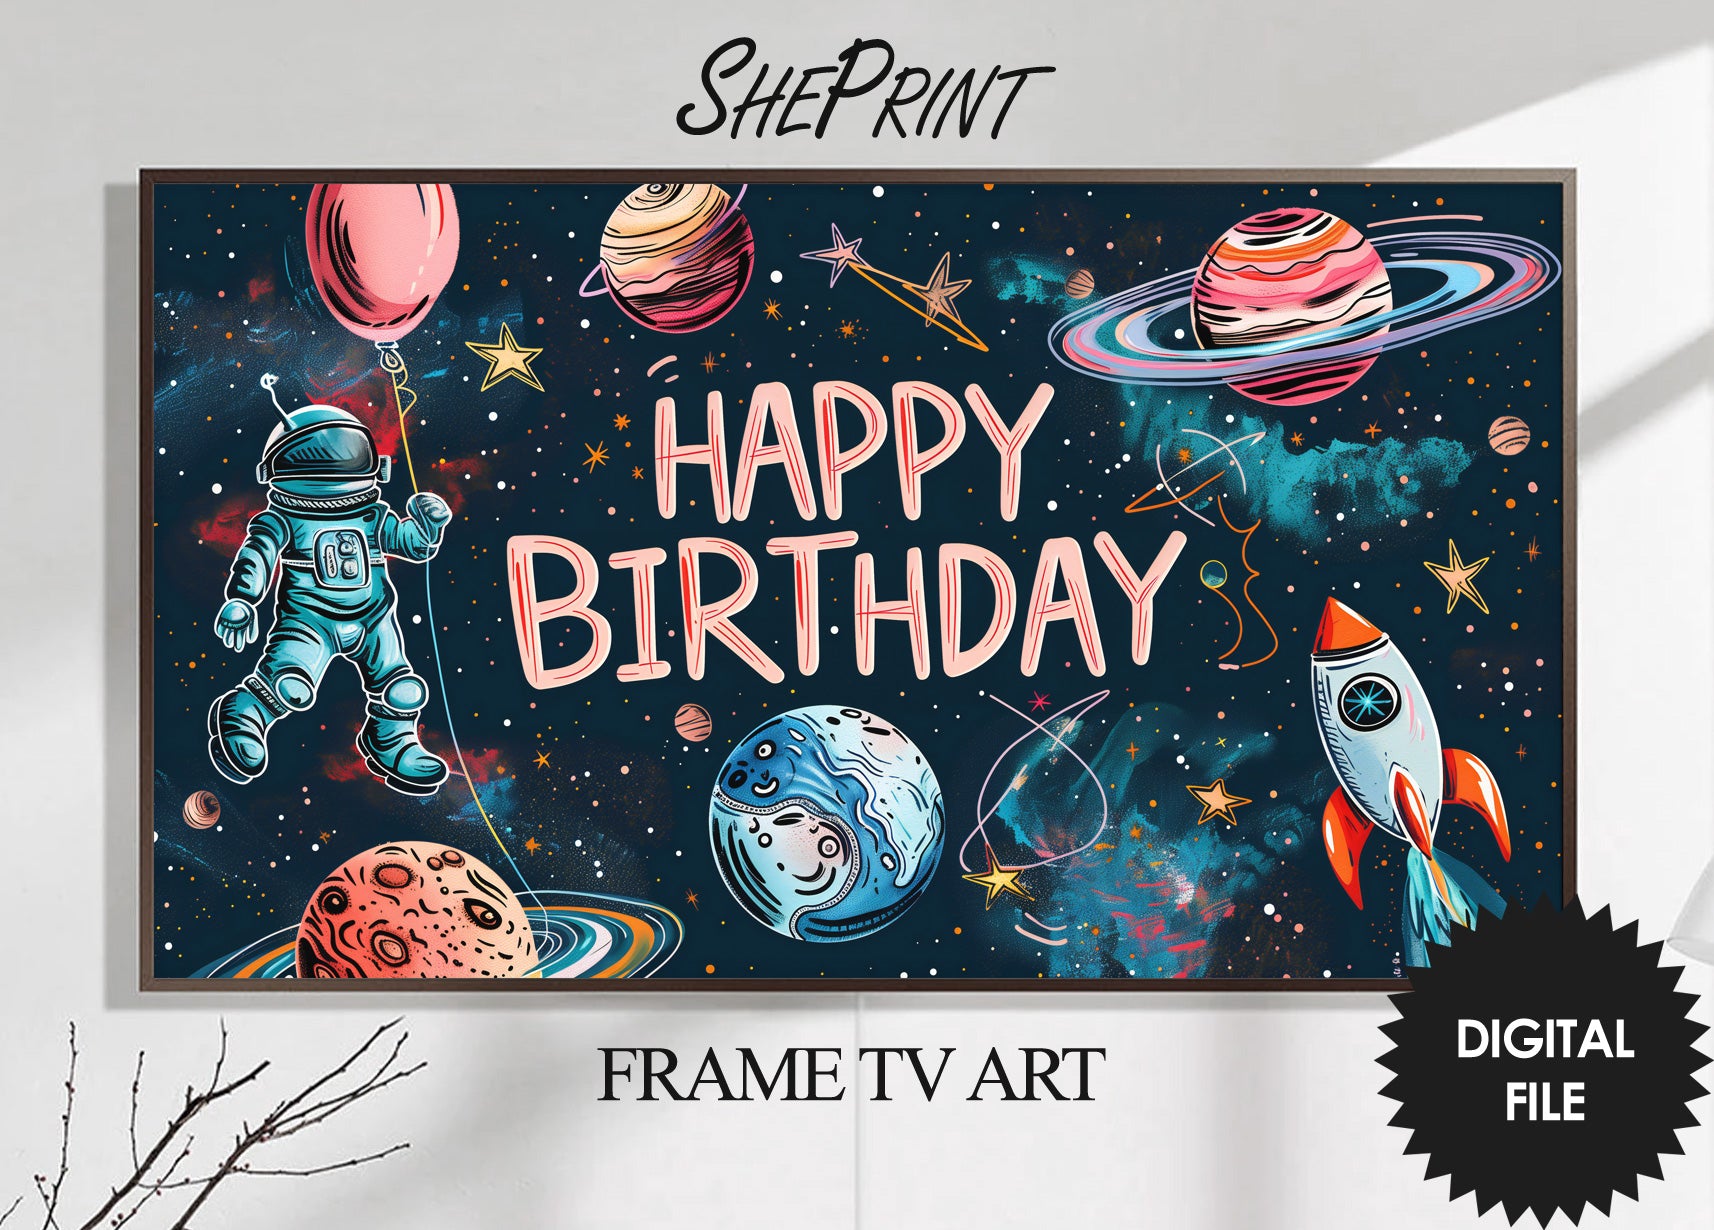 Frame TV Art Space Themed Birthday Party For Kids | Planets Stars Rocket Spaceman preview on Samsung Frame TV